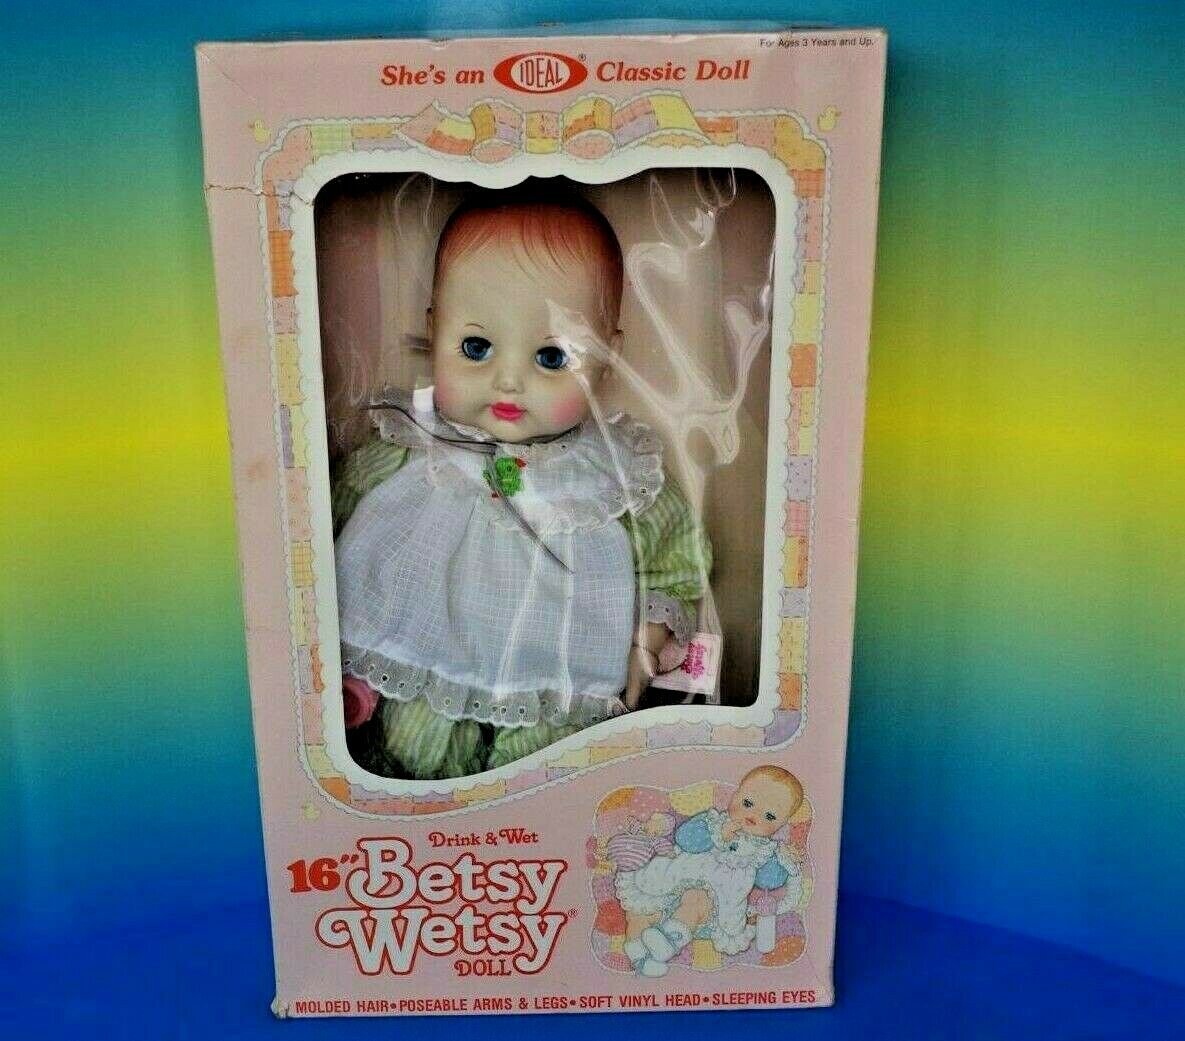 Vintage 1983 Ideal Betsy Wetsy Doll #14225- Drink And Wet Doll, 16” - New In Box